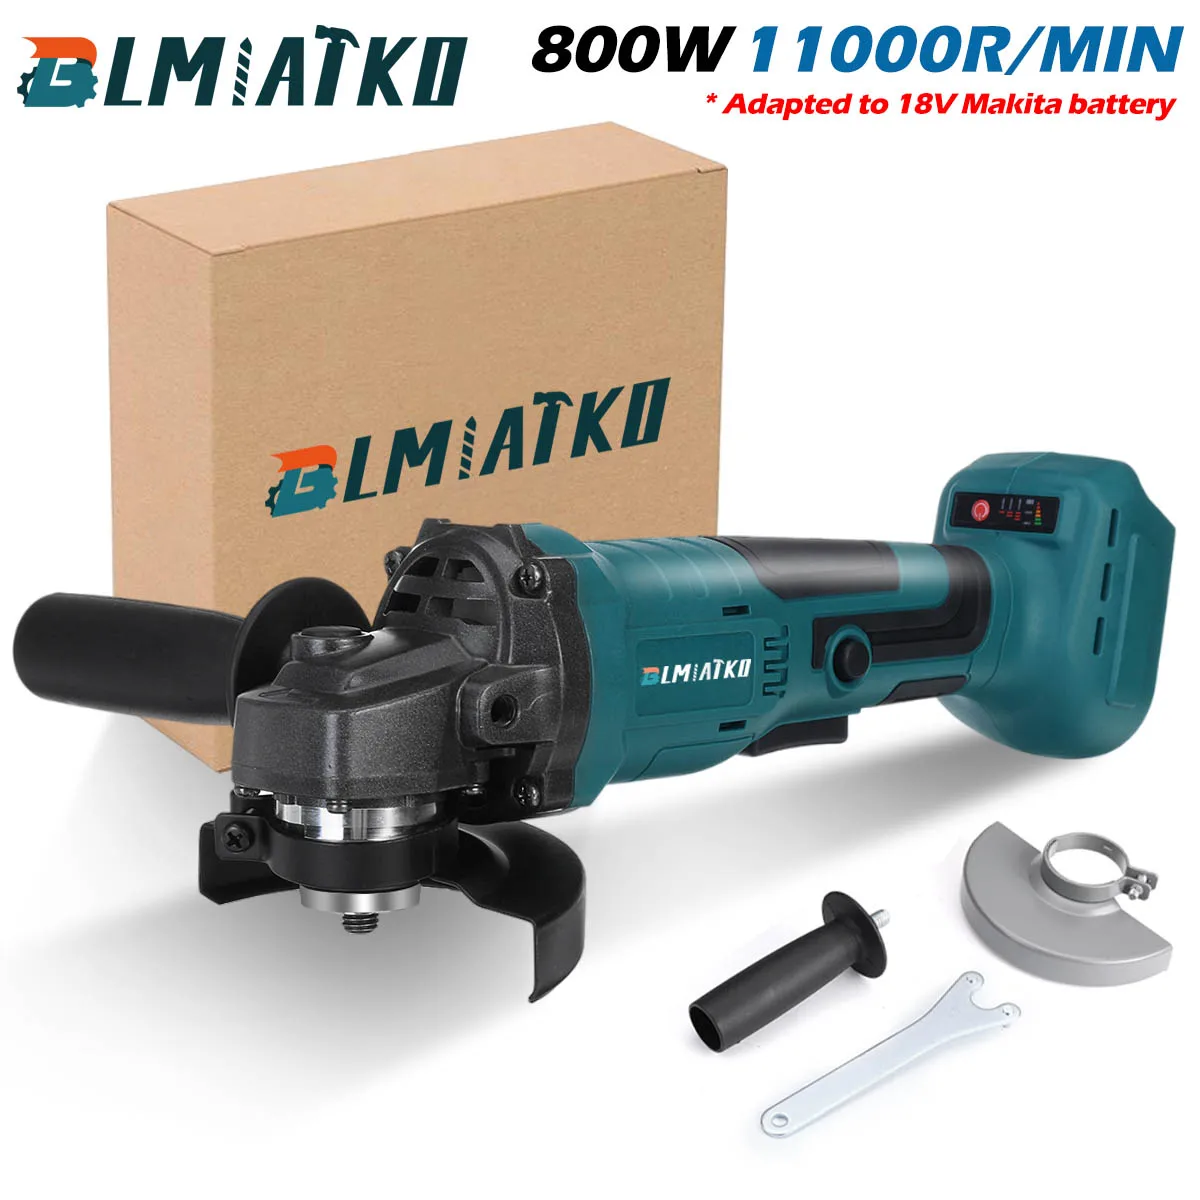 

BLMIATKO 125mm 3 Speed 800W Brushless Cordless Impact Angle Grinder Power Tool Cutting Machine Polisher For Makita 18V Battery